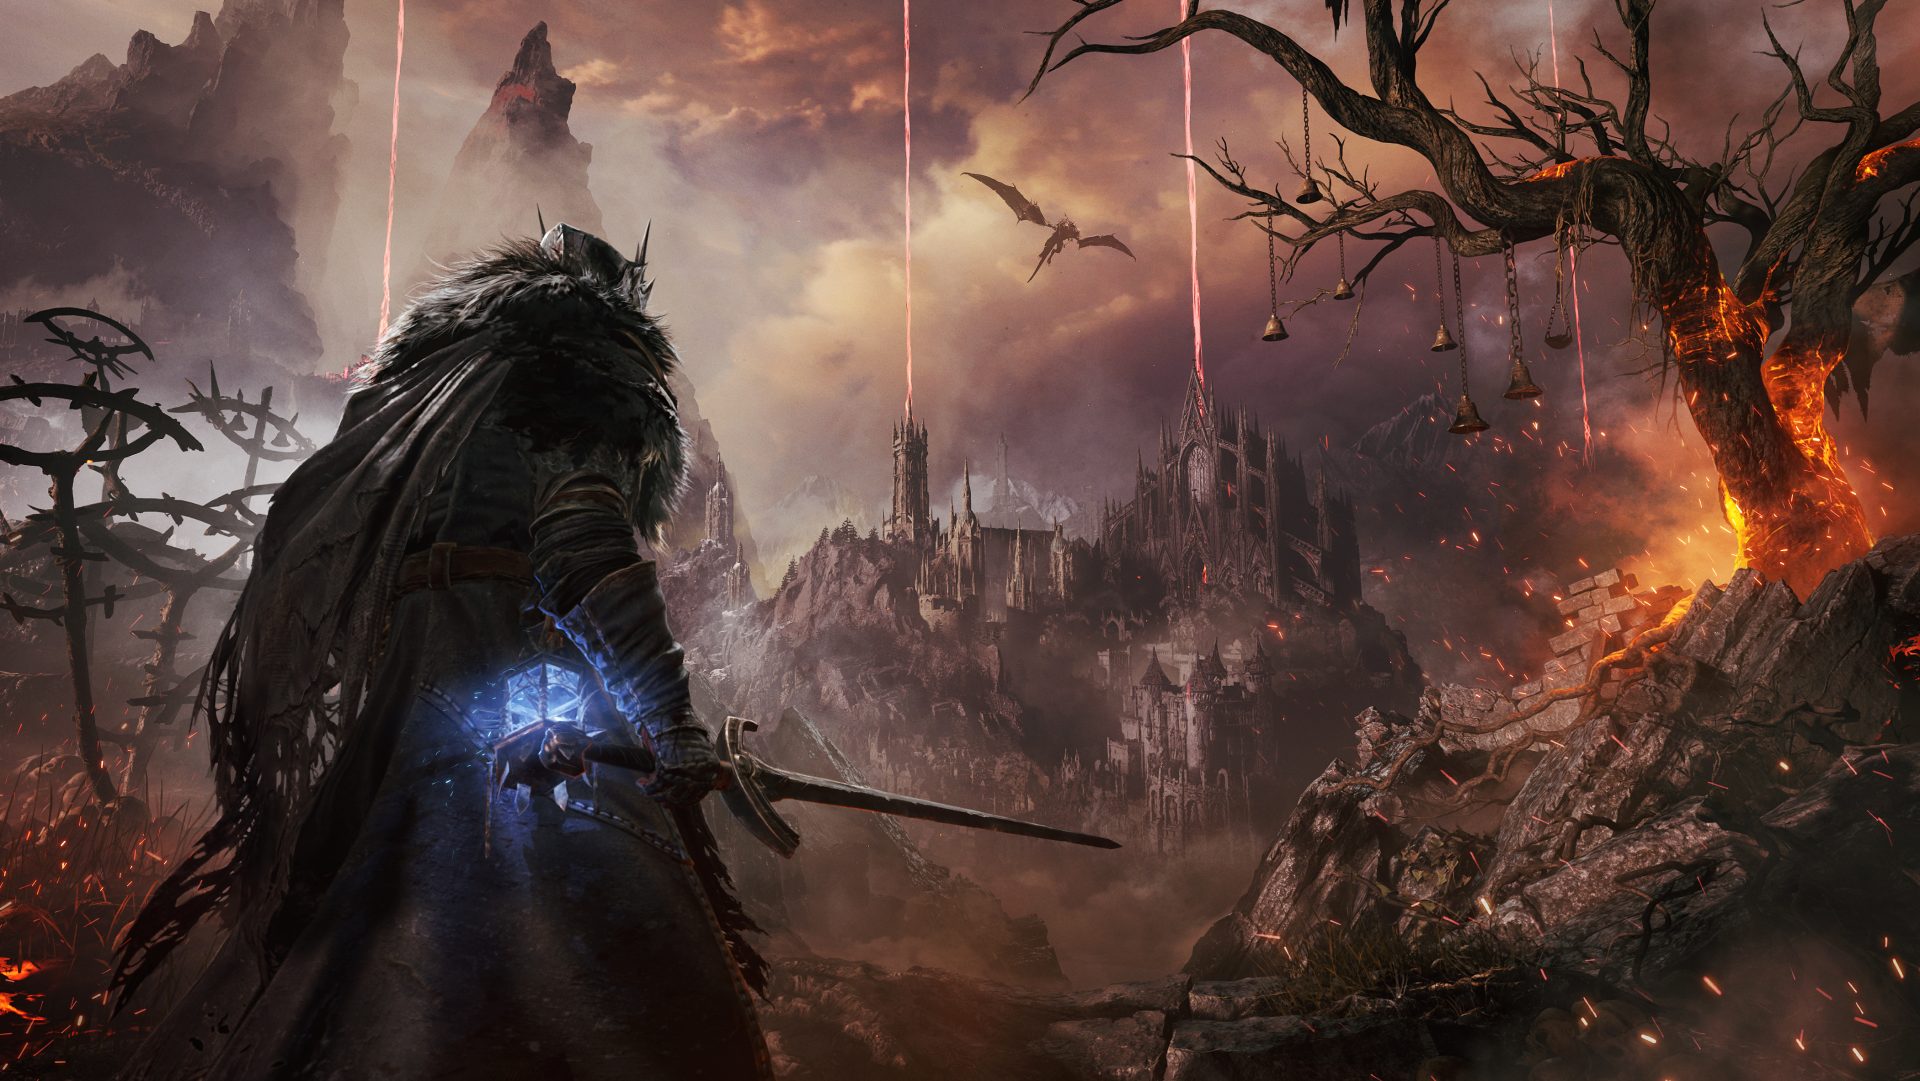 Lords of the Fallen gets a gothic and stunning launch trailer